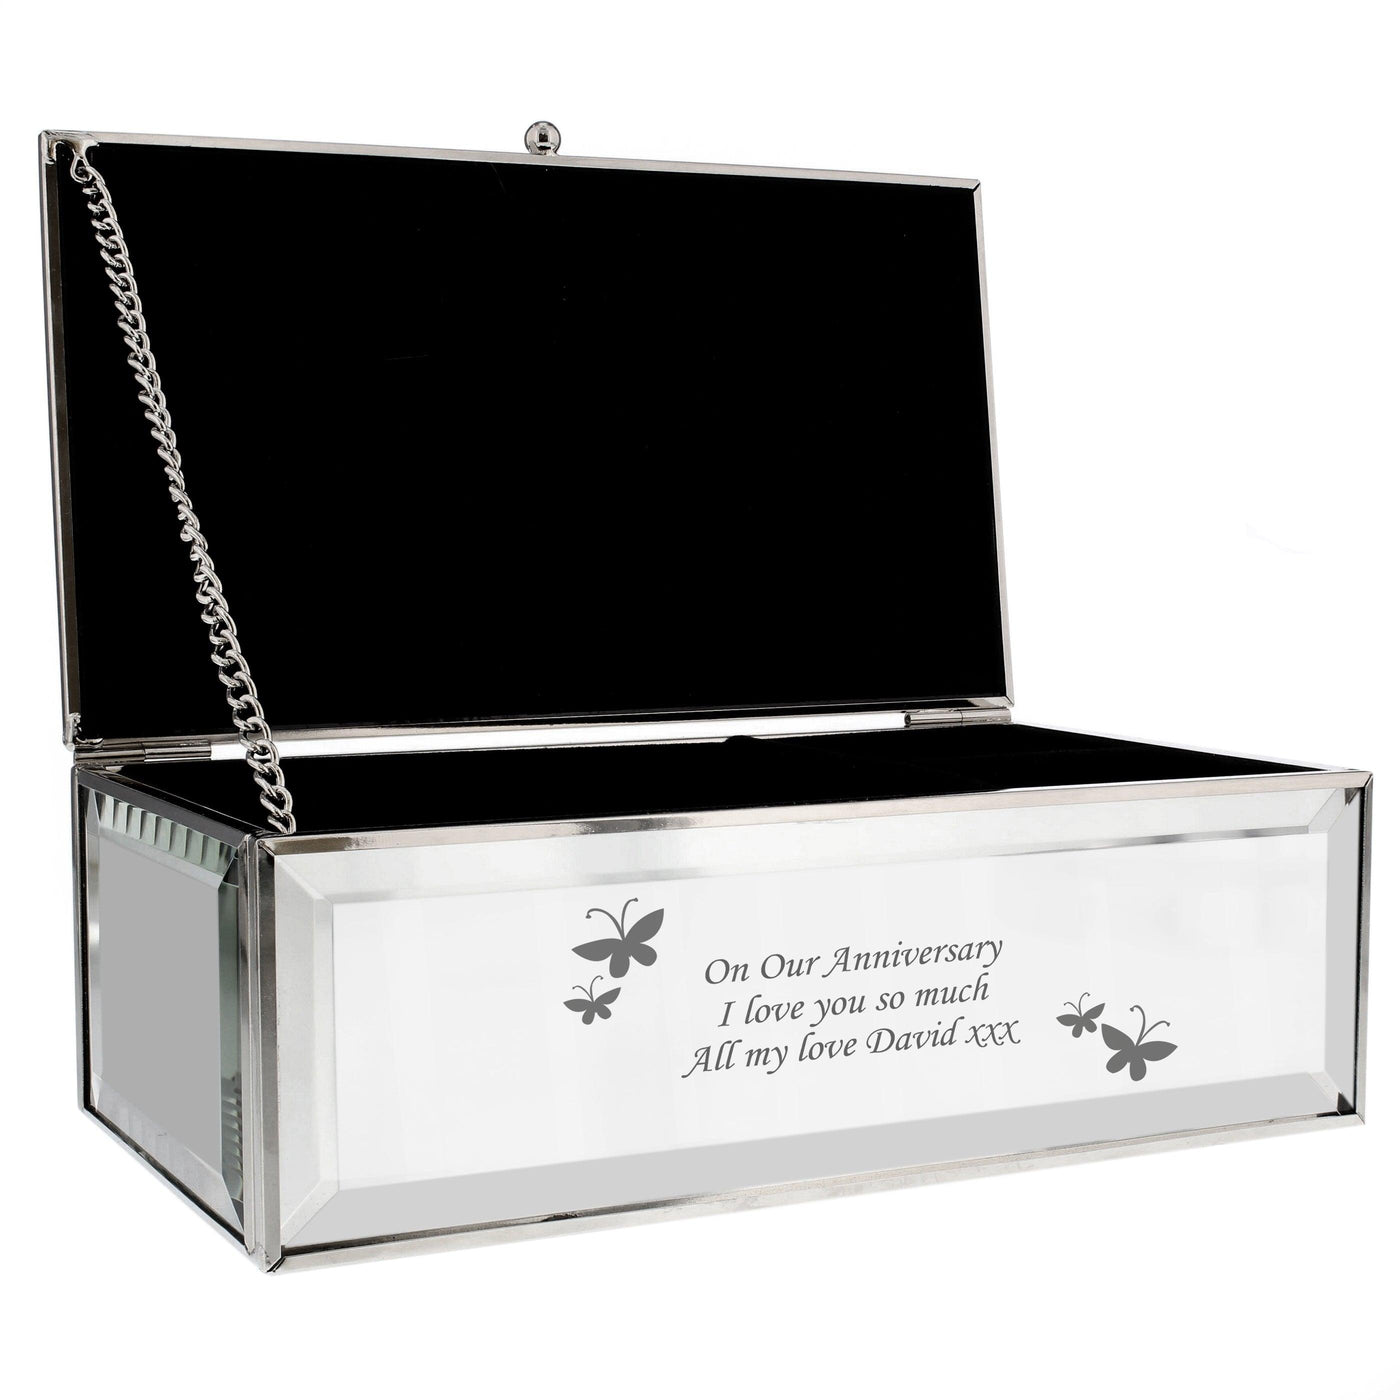 Personalised Butterflies Mirrored Jewellery Box - Shop Personalised Gifts